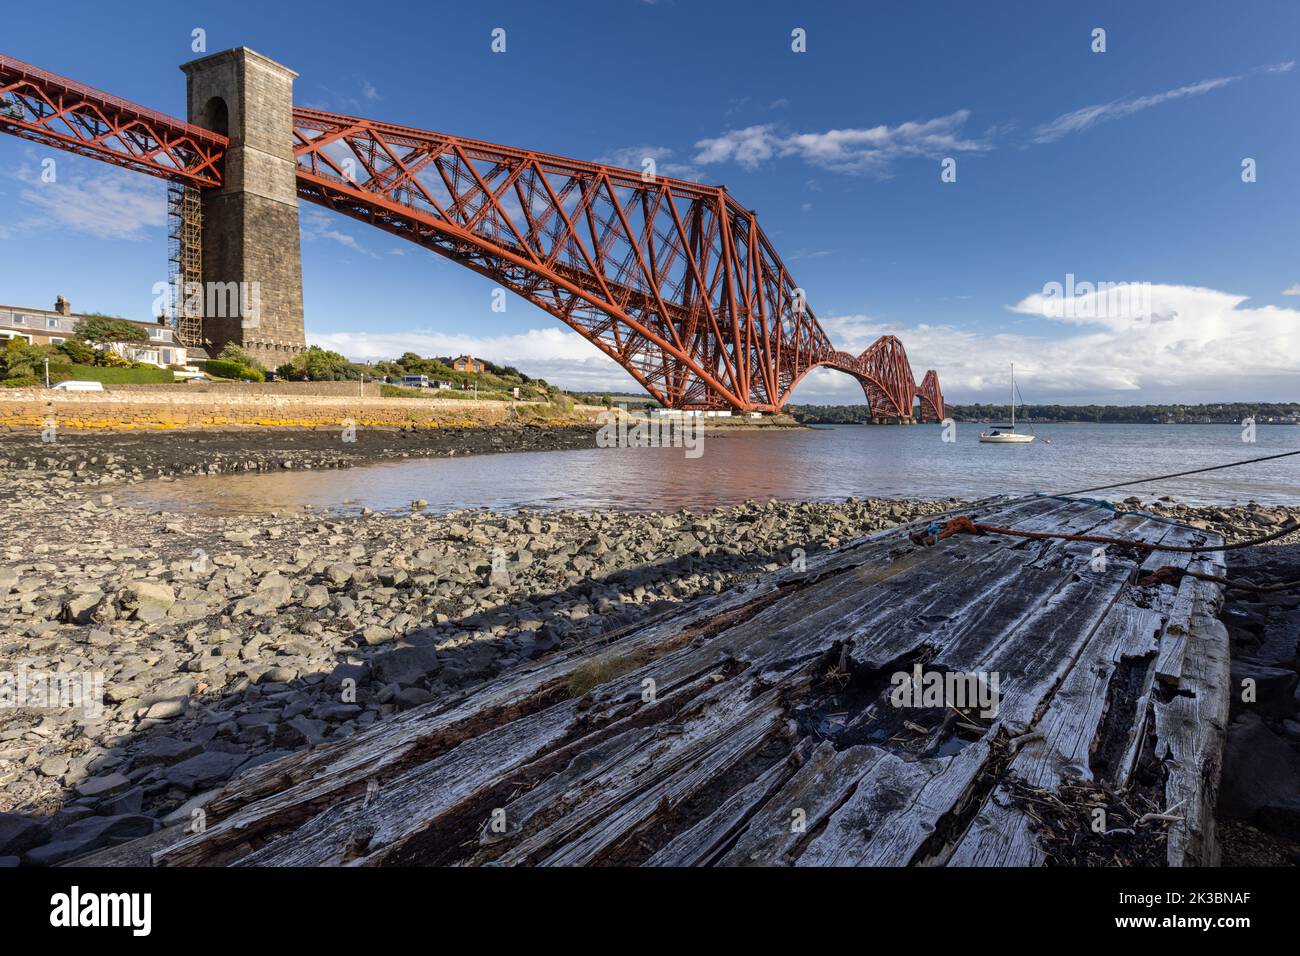 The mighty Forth rail bridge spreading across the Firth of Forth connecting north and south Queensferry in Scotland. Taken from North Queensferry. Stock Photo